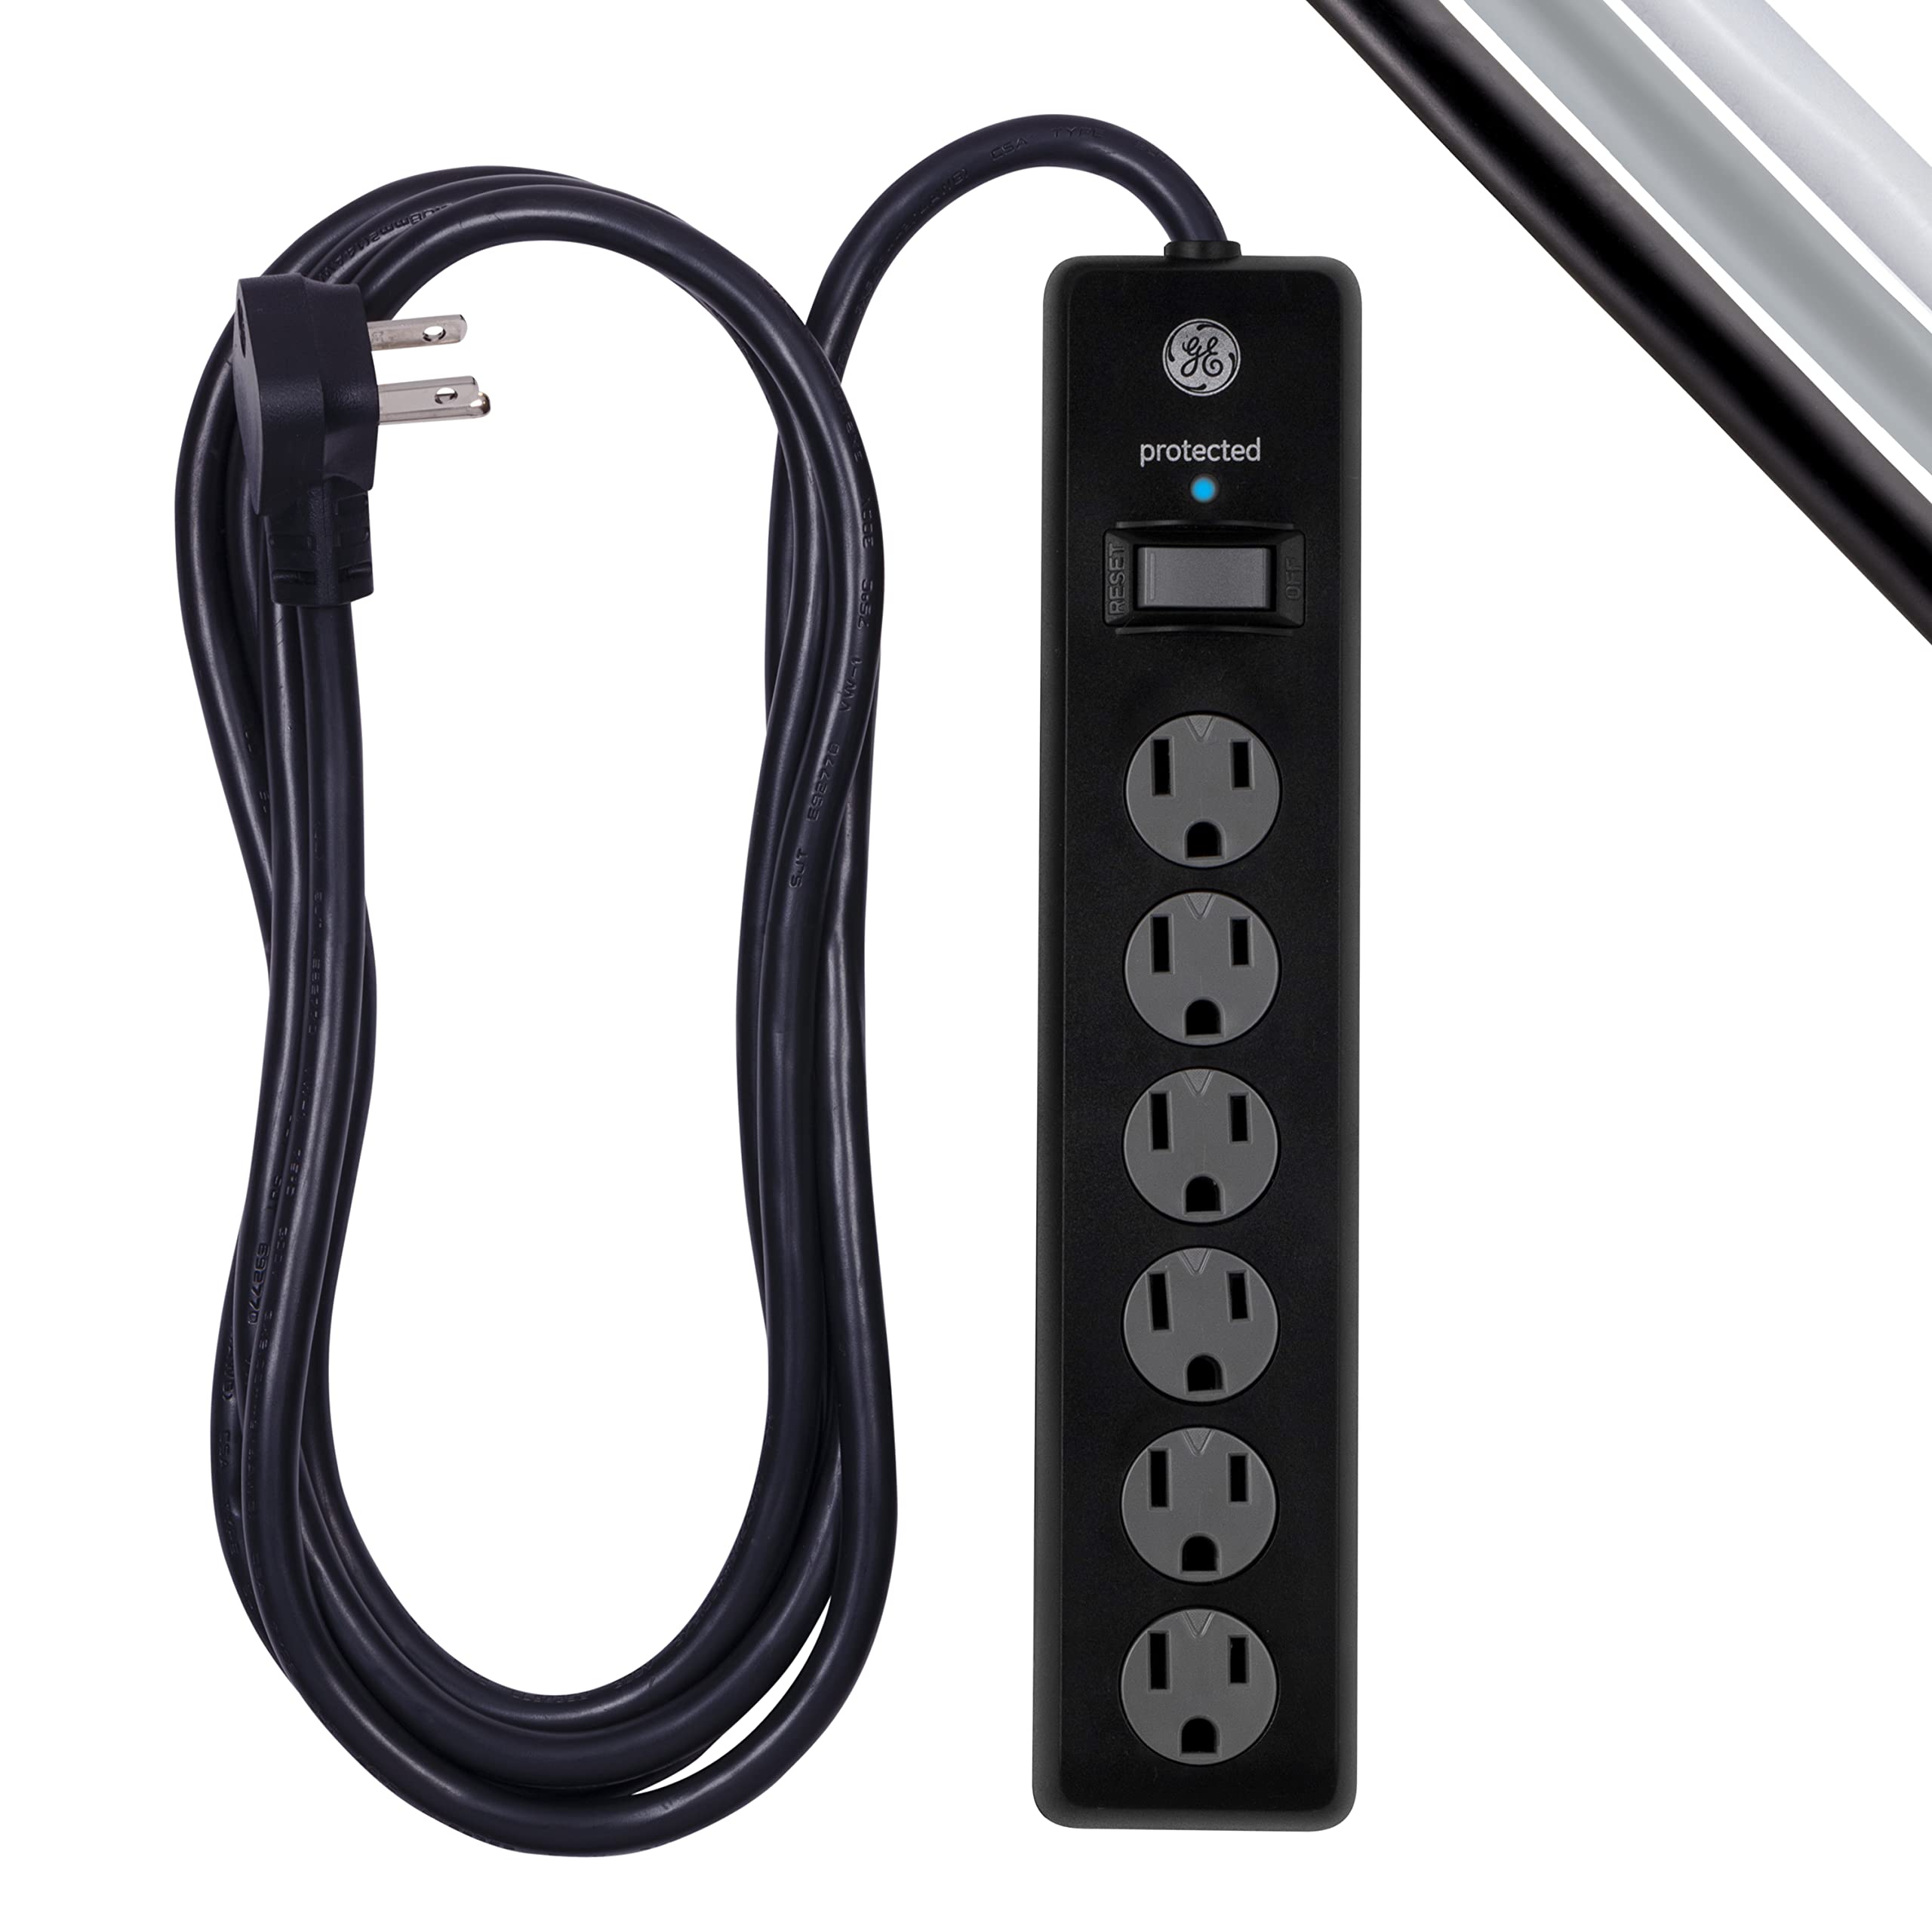 GE 6-Outlet Surge Protectors, 800 Joules & 600 Joules, 6 Ft & 10 Ft Extension Cords, Power Strips, Flat Plugs, Twist-to-Close Safety Covers, Protected Indicator Lights, UL Listed, Black